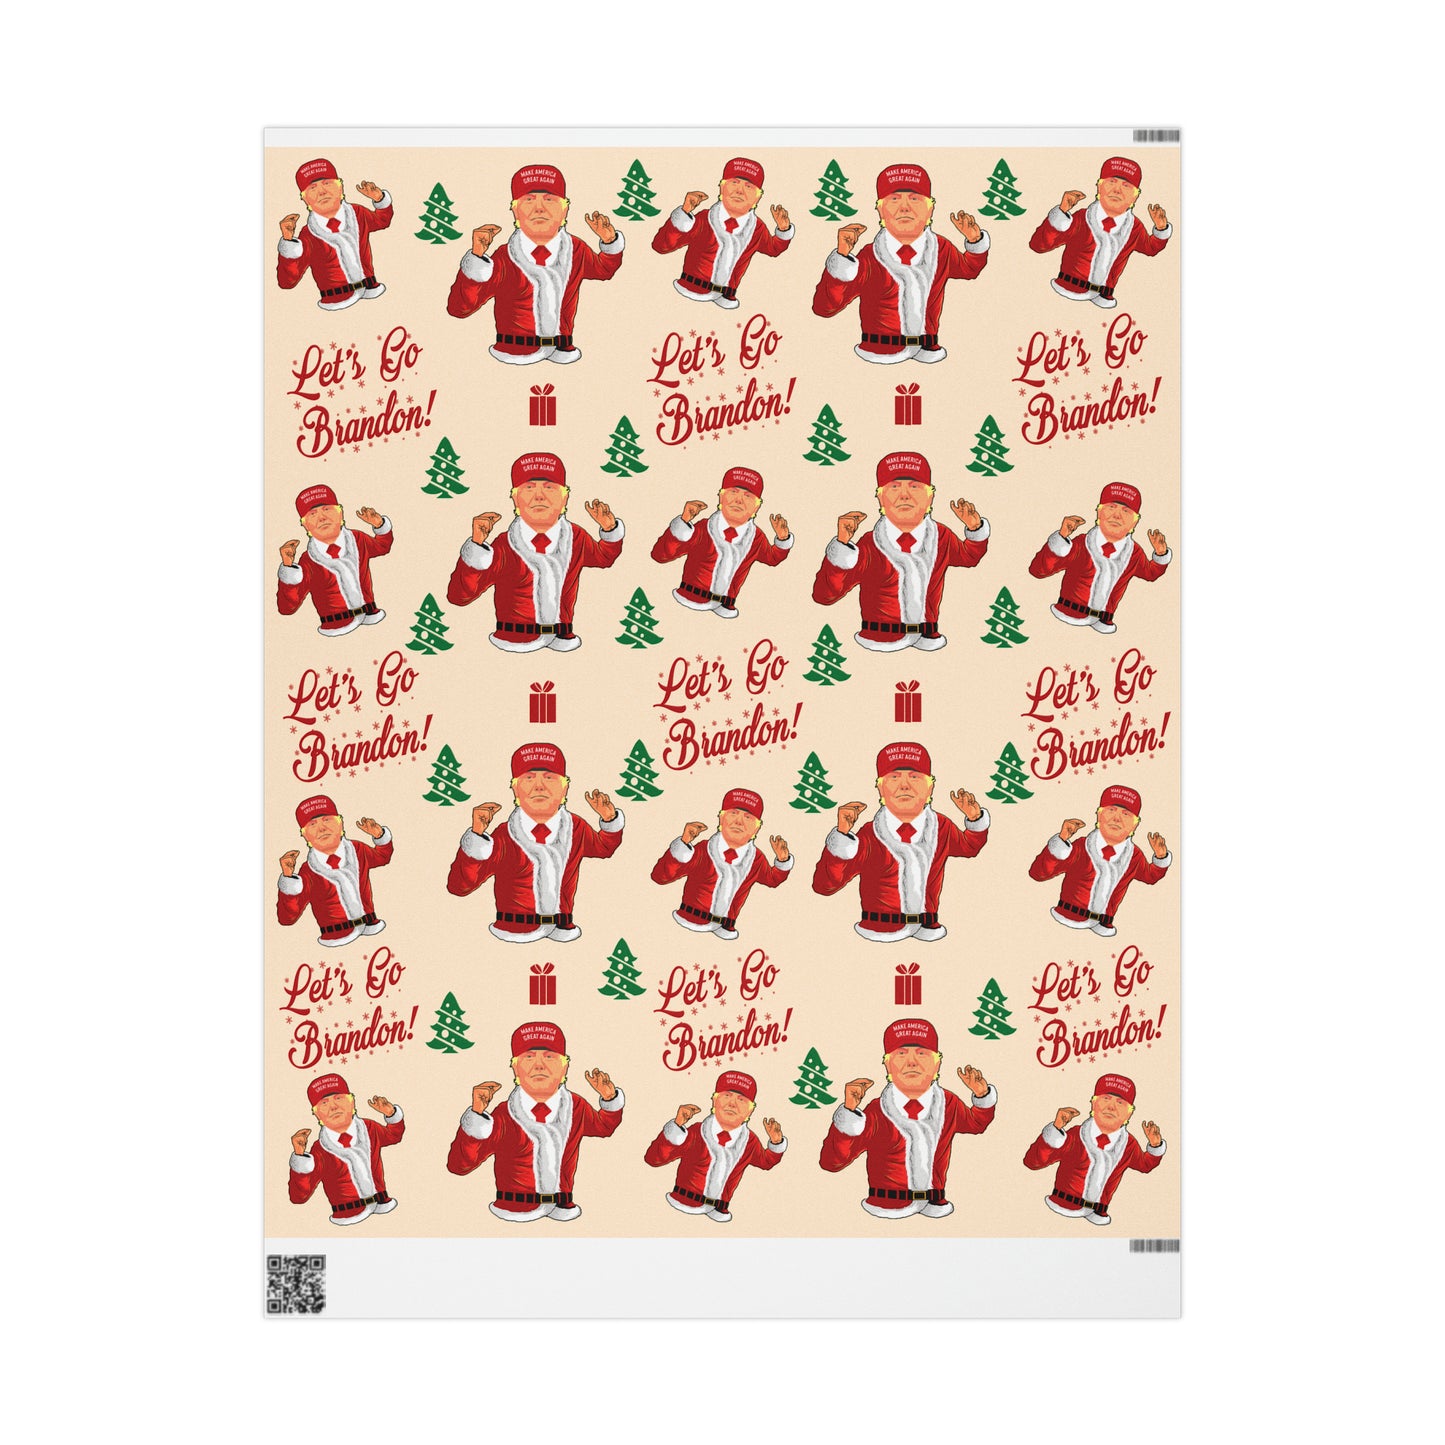 Funny Trump Christmas Wrapping Paper for Gifts - Let's Go Brandon Gift - Funny Santa Trump Wrapping Paper Christmas